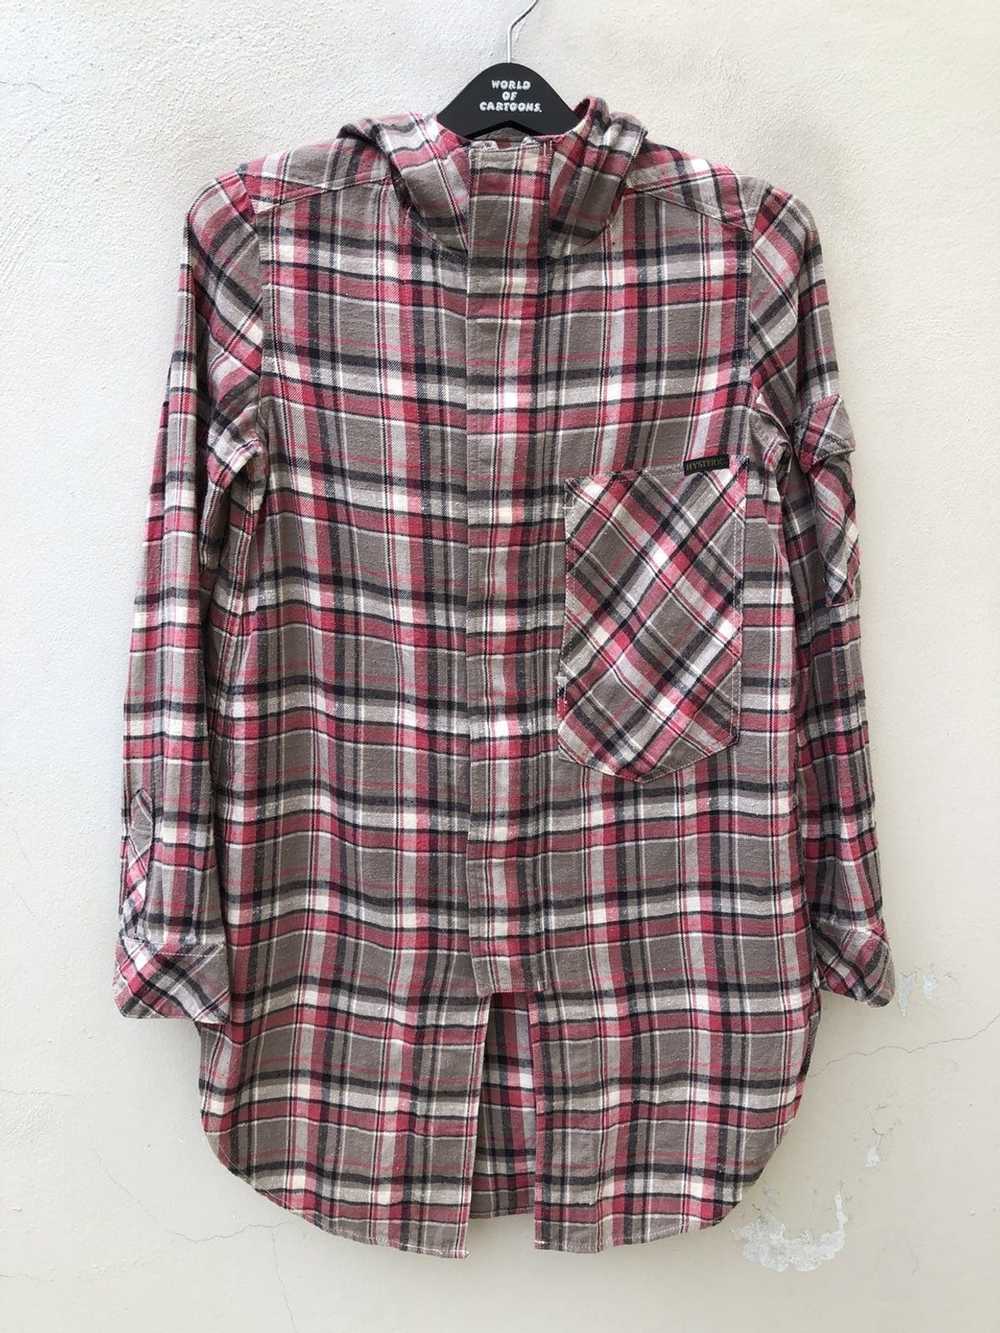 Hysteric Glamour Hysteric Glamour Plaid Hoodie Tu… - image 4